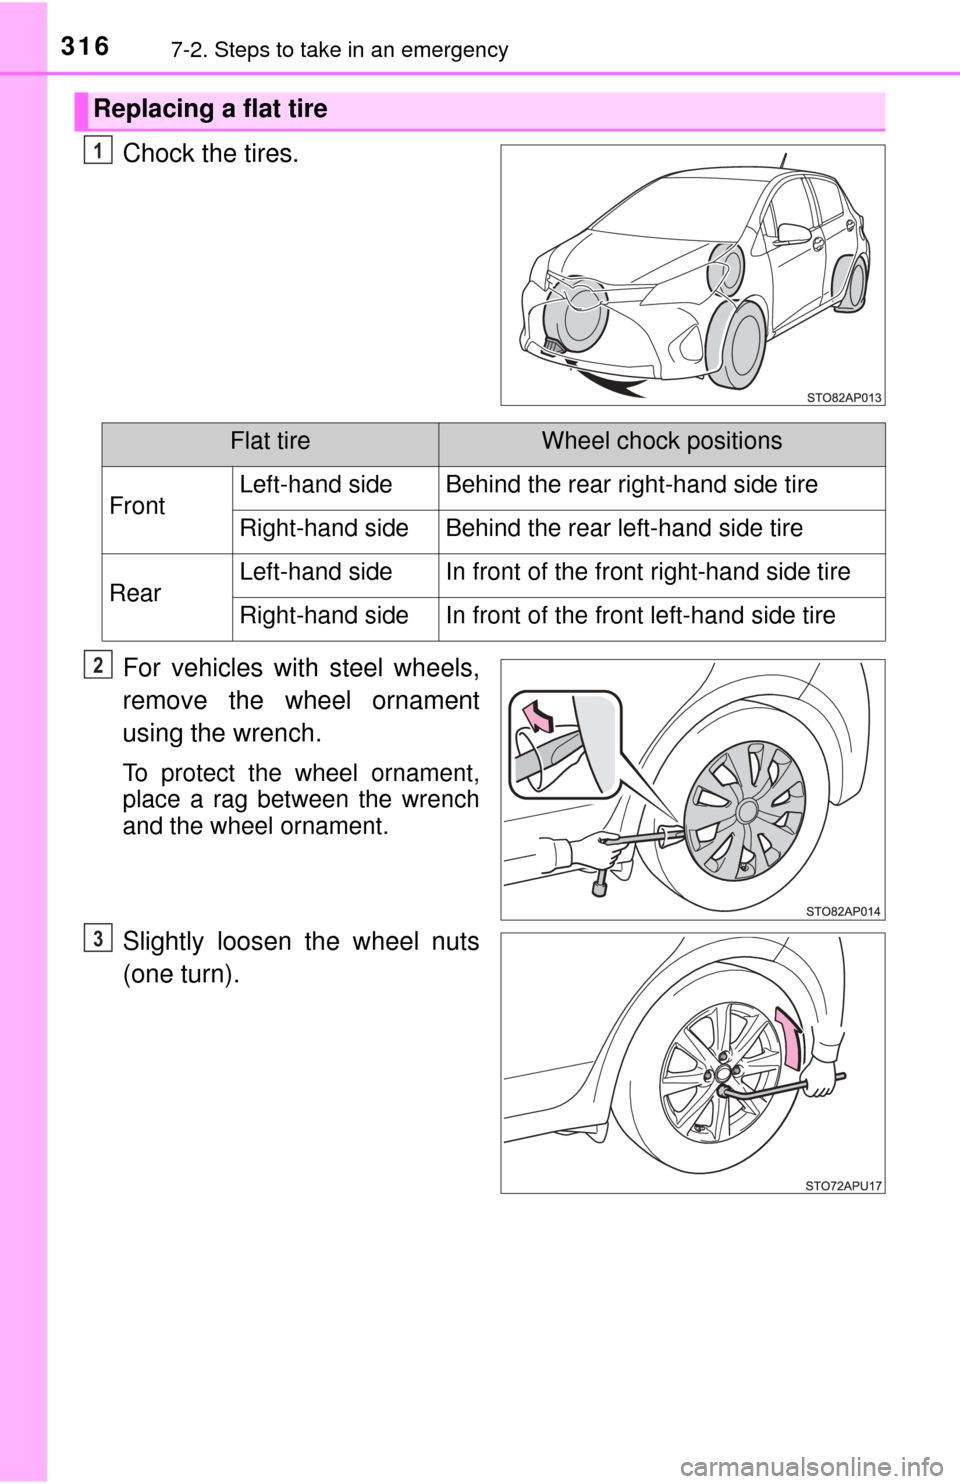 TOYOTA YARIS 2017 3.G Owners Guide 3167-2. Steps to take in an emergency
Chock the tires.
For vehicles with steel wheels,
remove the wheel ornament
using the wrench.
To protect the wheel ornament,
place a rag between the wrench
and the